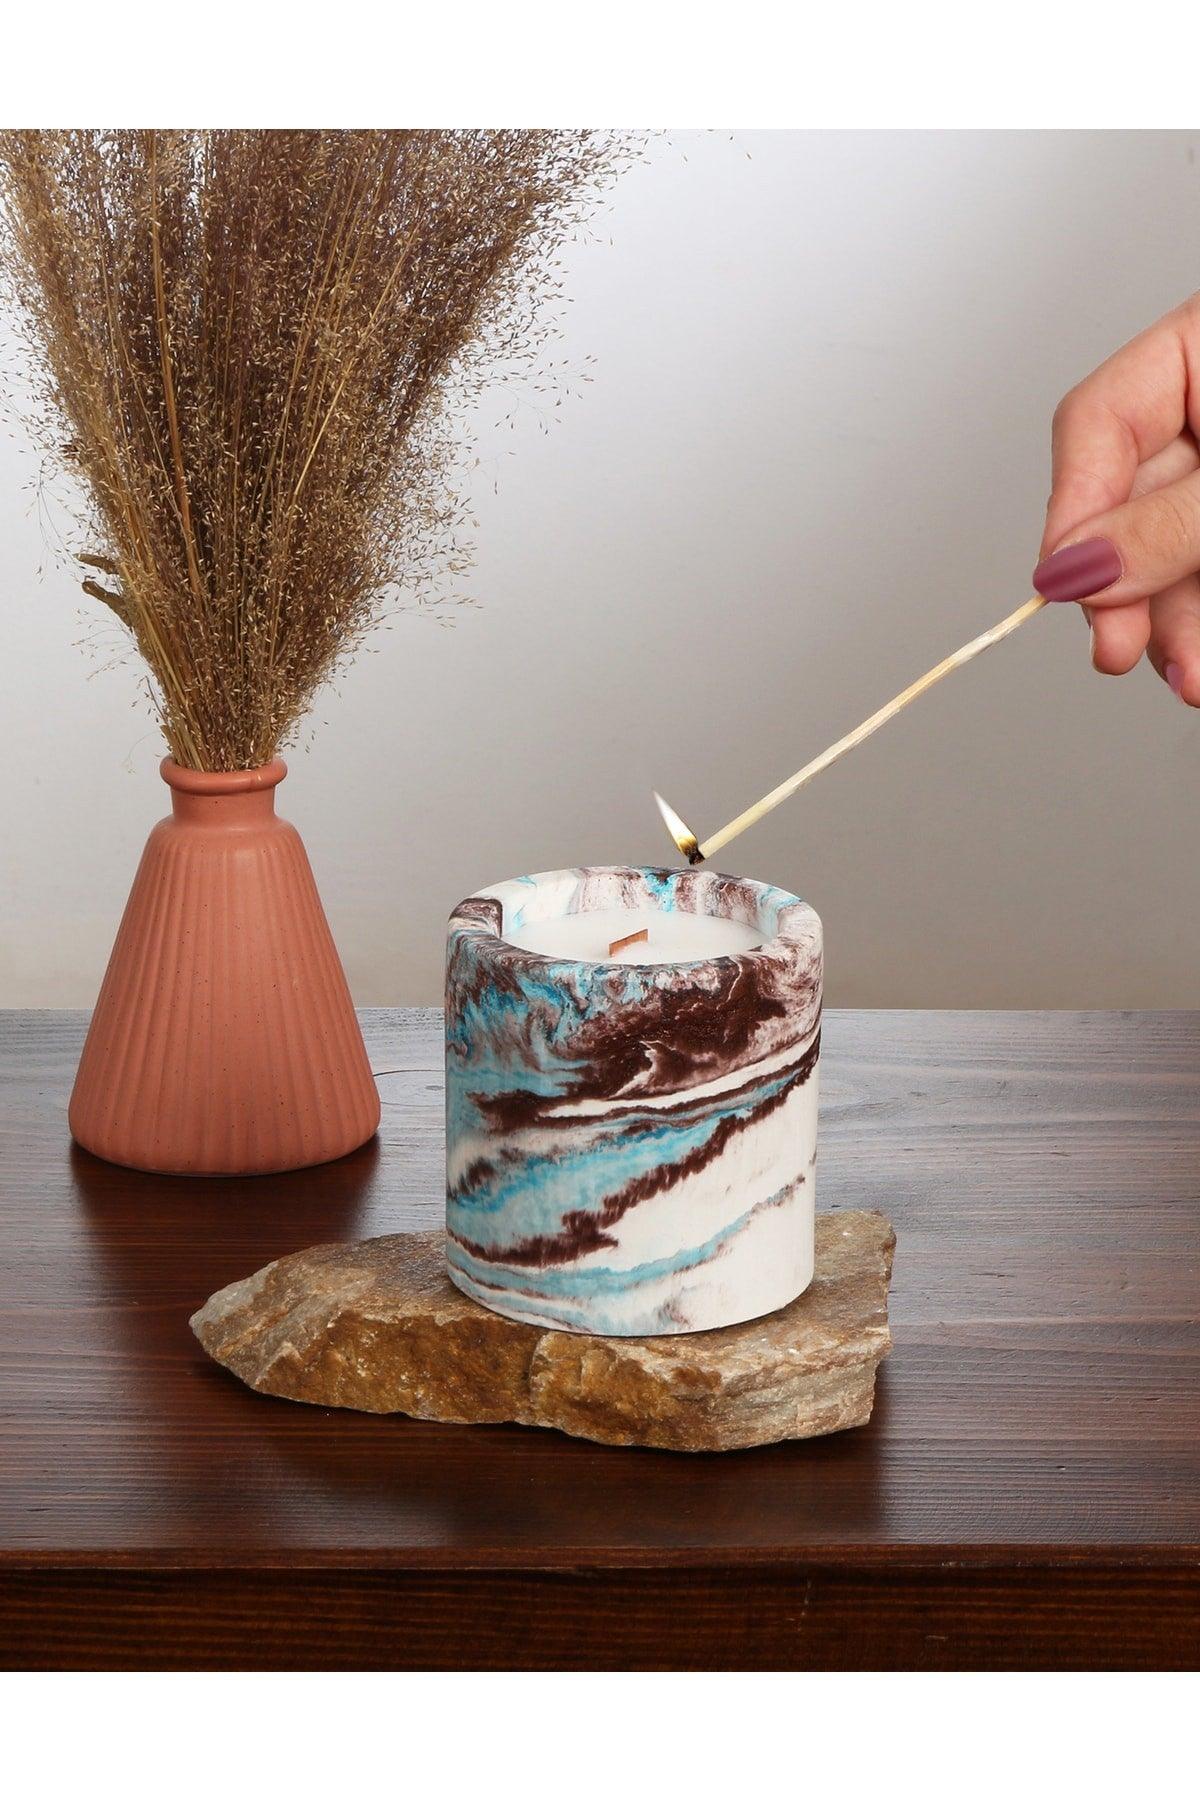 Decorative Blue-brown Marble Look Scented Concrete Candle, Soy Wax Bamboo Wick - Swordslife